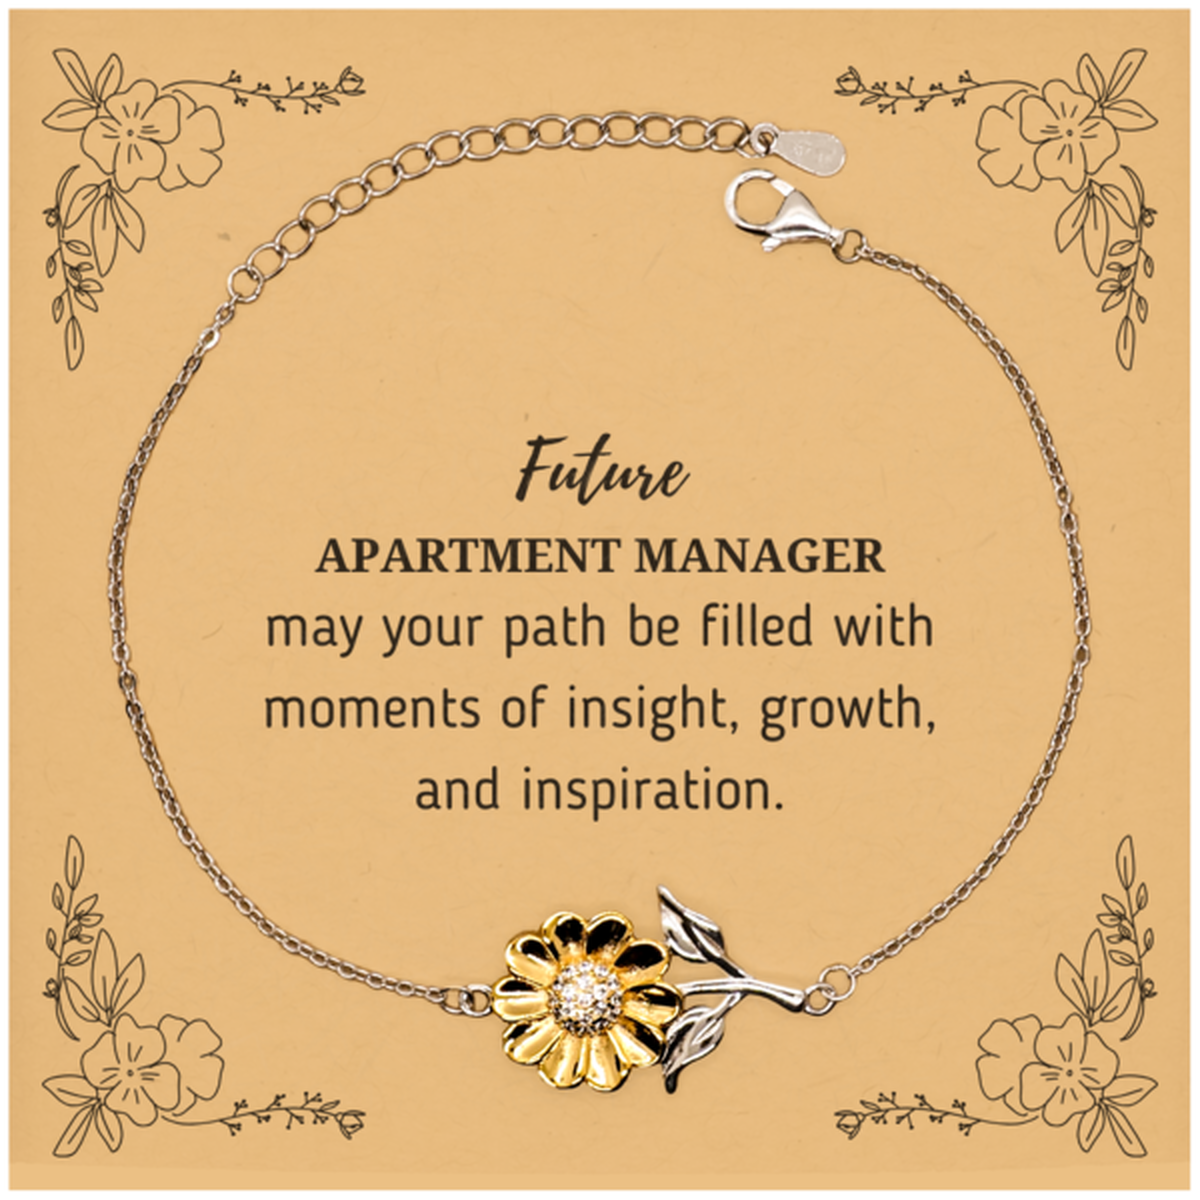 Future Apartment Manager Gifts, May your path be filled with moments of insight, Graduation Gifts for New Apartment Manager, Christmas Unique Sunflower Bracelet For Men, Women, Friends